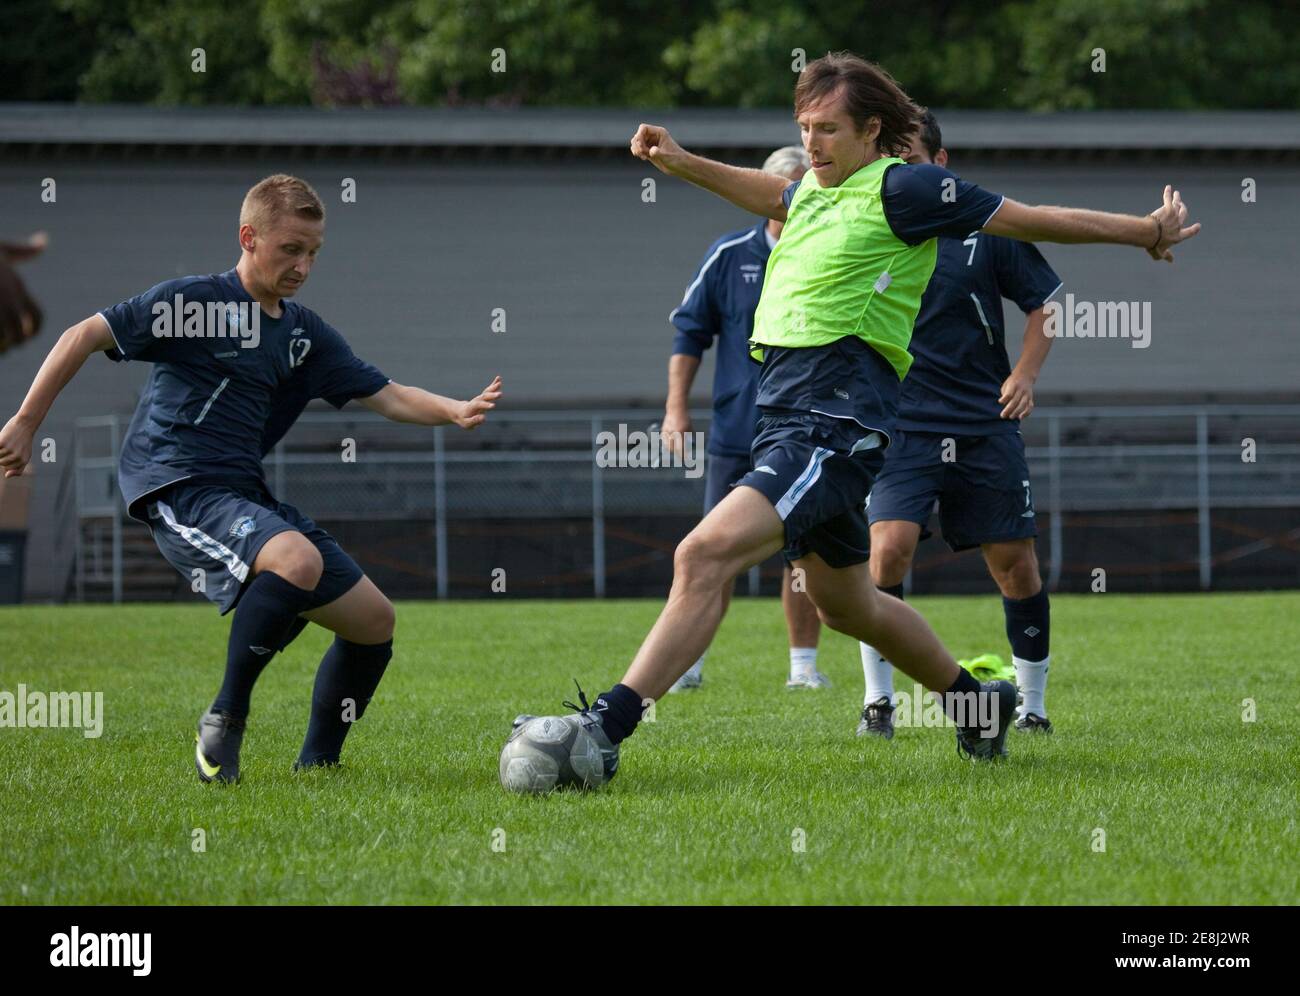 NBA star Steve Nash (R) chases the ball while training with young prospect players for the Vancouver Whitecaps FC in Vancouver, British Columbia September 17, 2009. Nash will be playing a celebrity benefit game on Saturday.        REUTERS/Andy Clark   (CANADA SPORT SOCCER BASKETBALL) Stock Photo